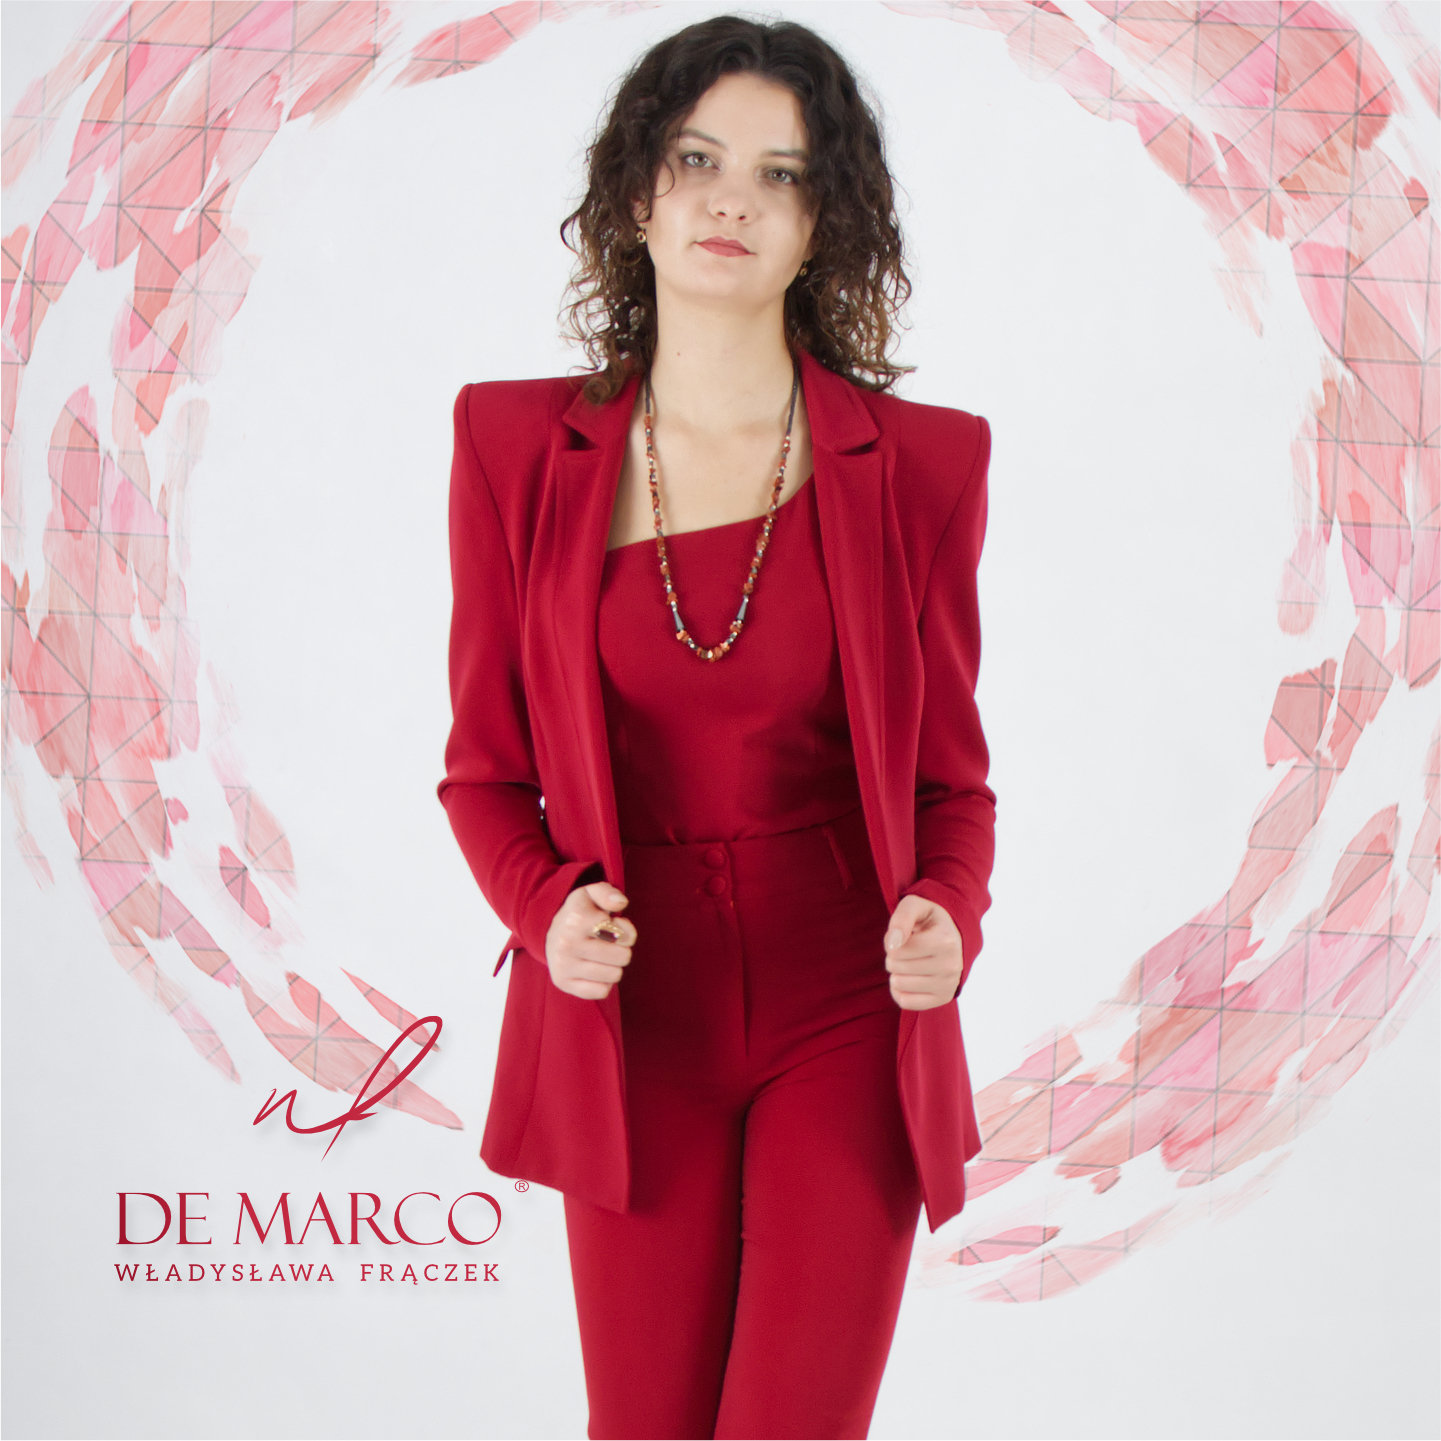 De Marco women’s red formal suit: the power of elegance for Autumn